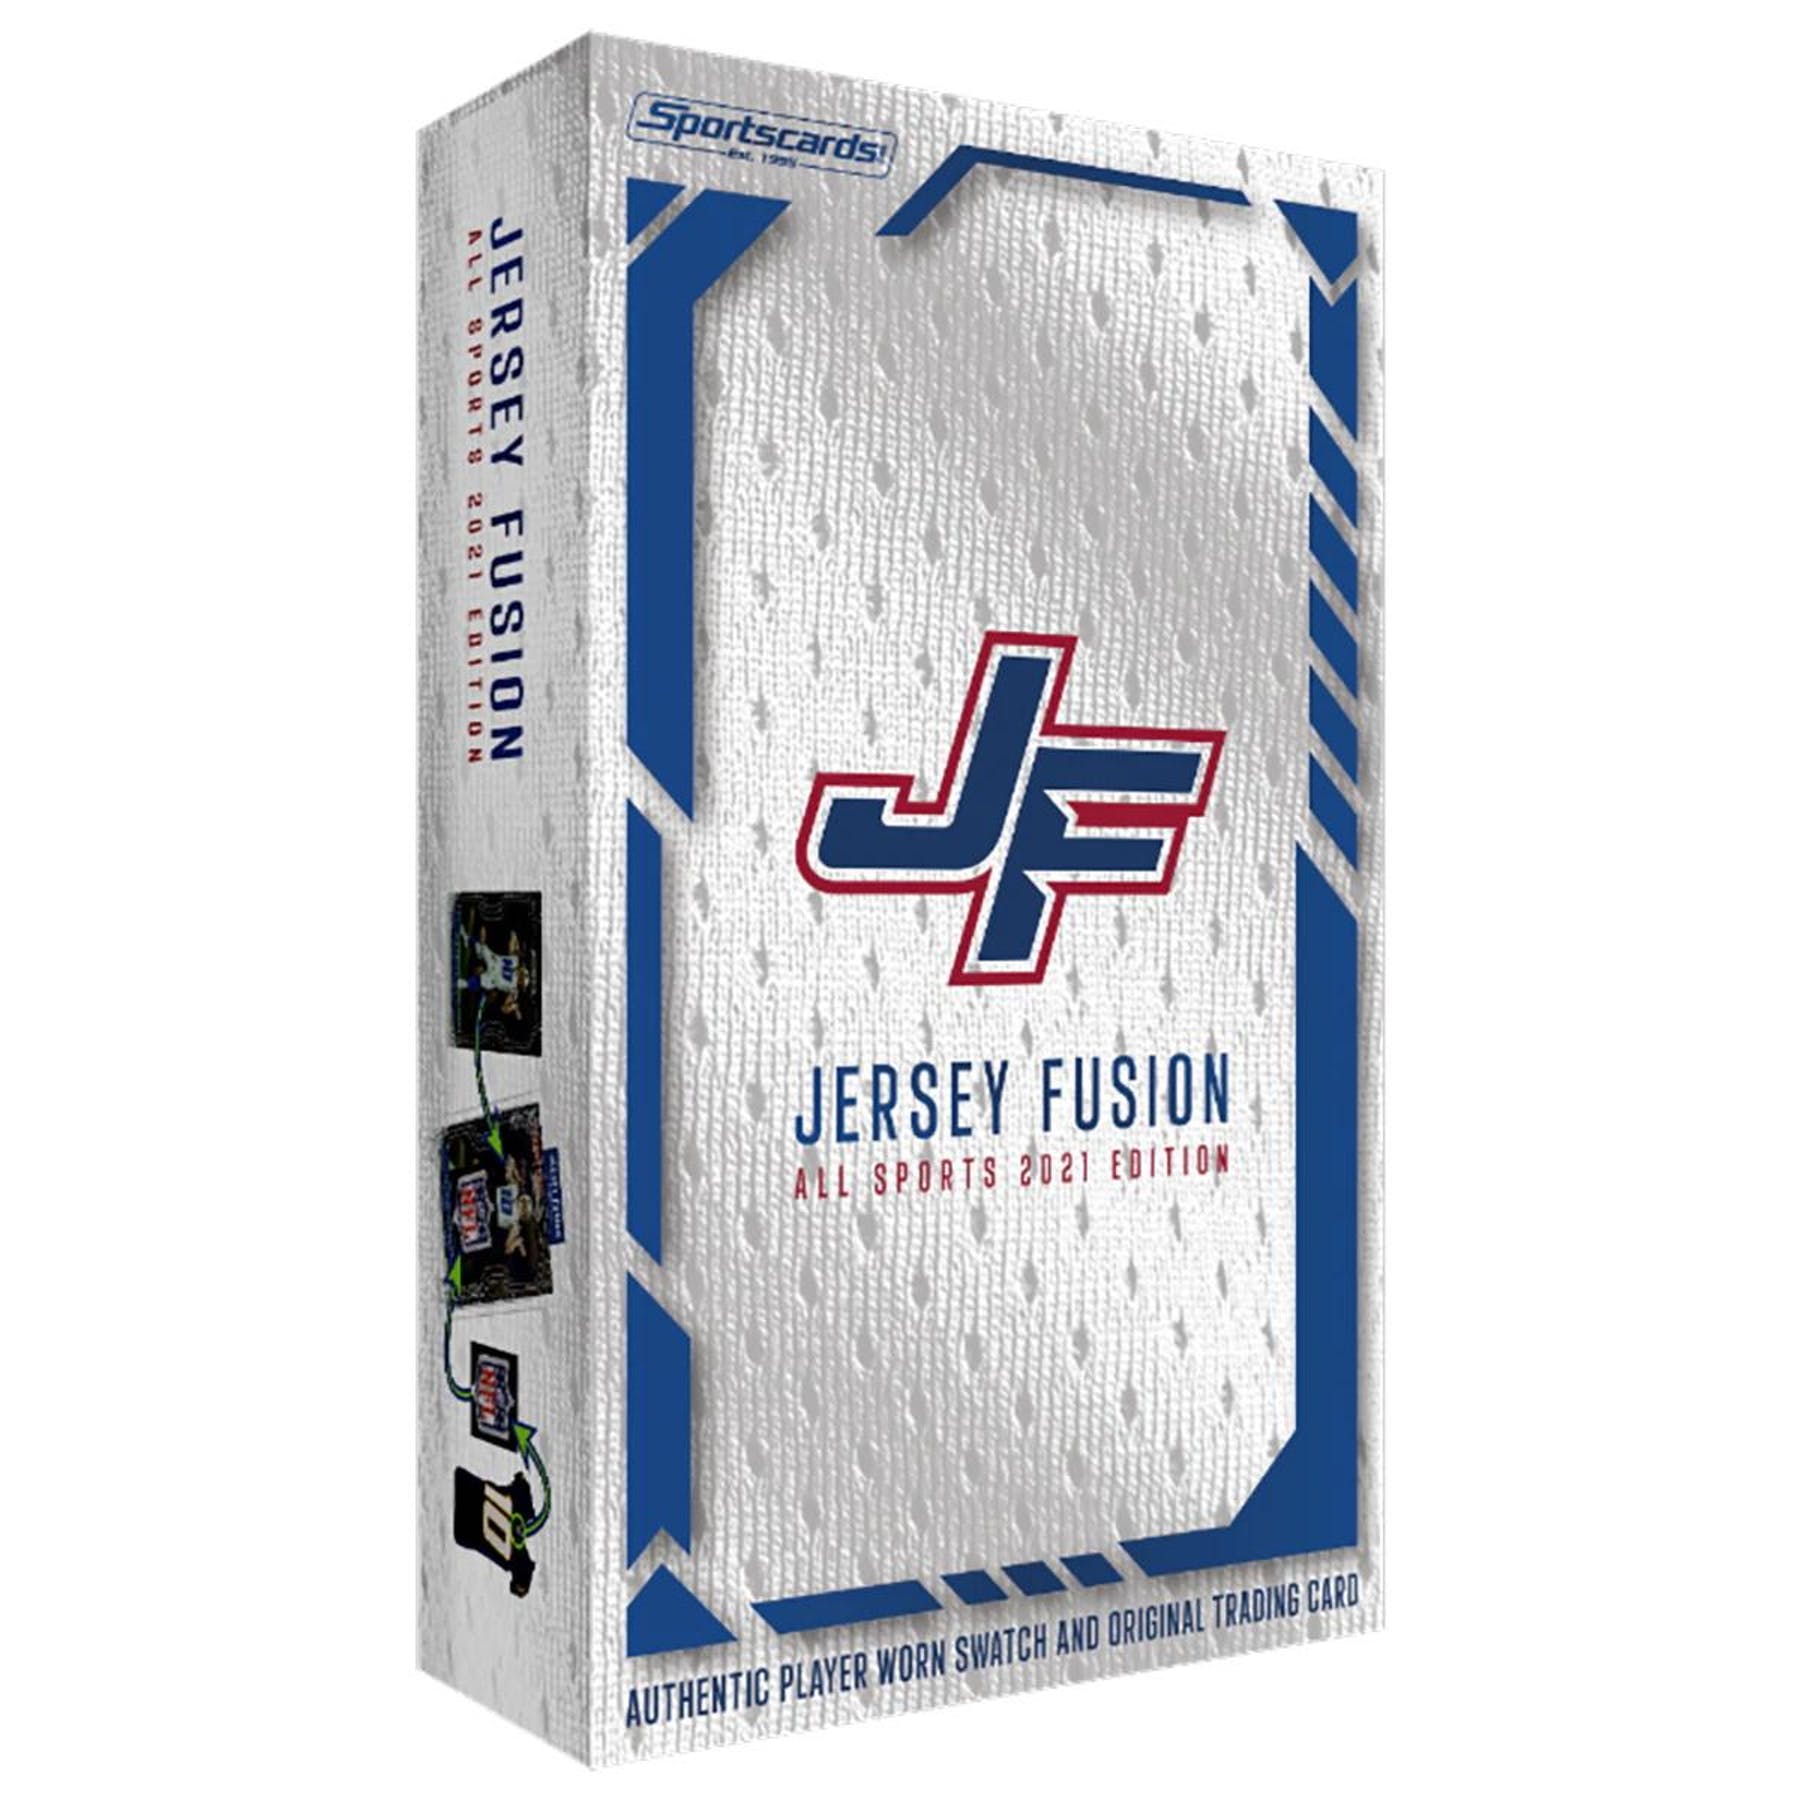 2021 Jersey Fusion All Sports Edition Blaster Box | Eastridge Sports Cards